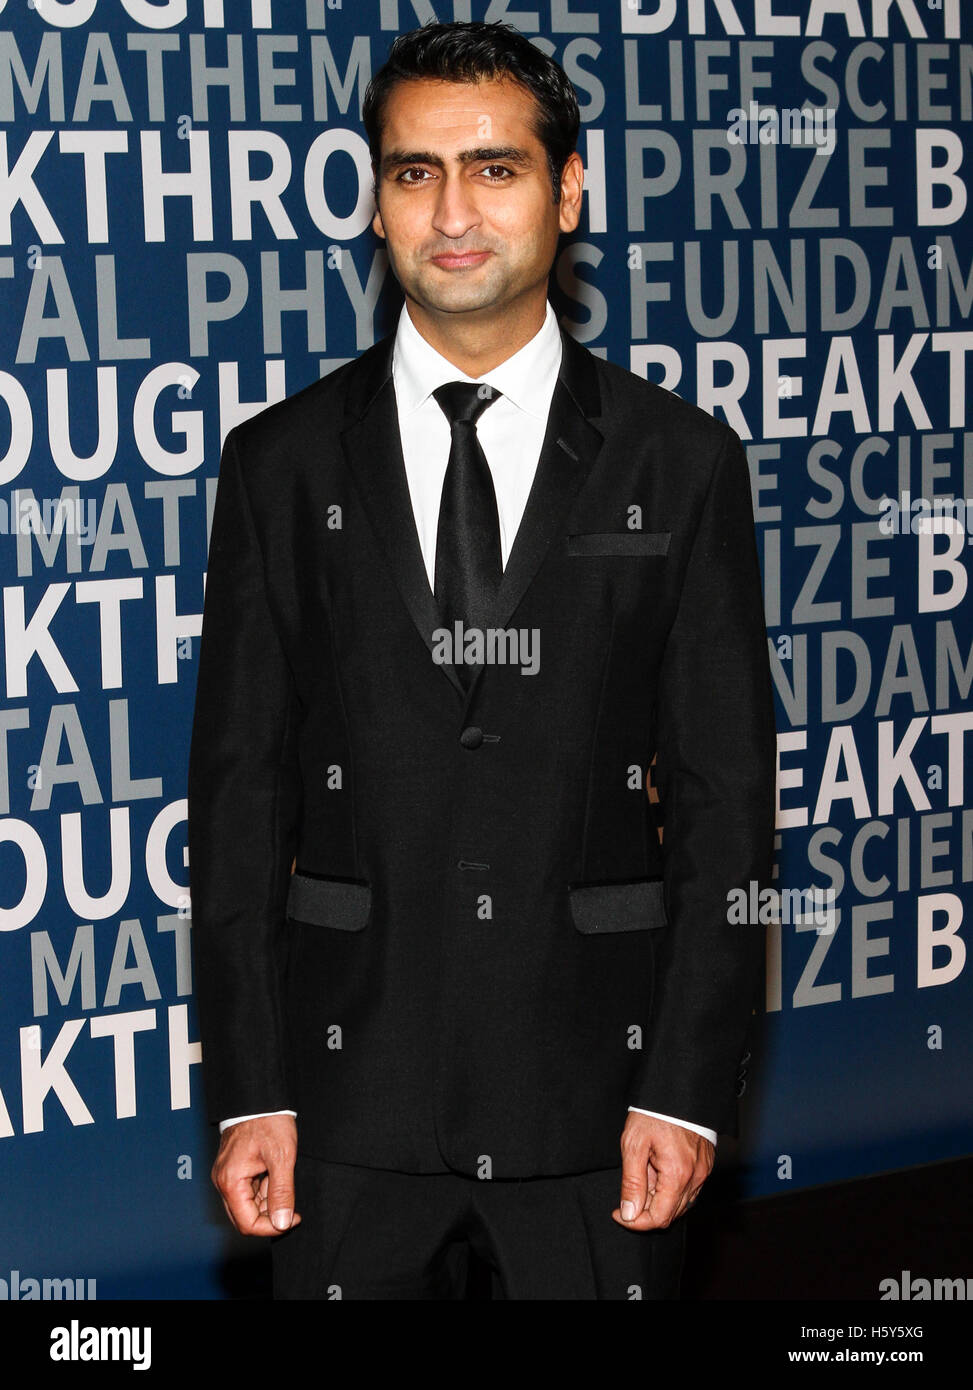 MOUNTAIN VIEW, CA - NOV 8:  Actor Kumail Nanjiani of the television series Silicon Valley attends the a, California. (Photography by Christopher Victorio for The Photo Access). Stock Photo